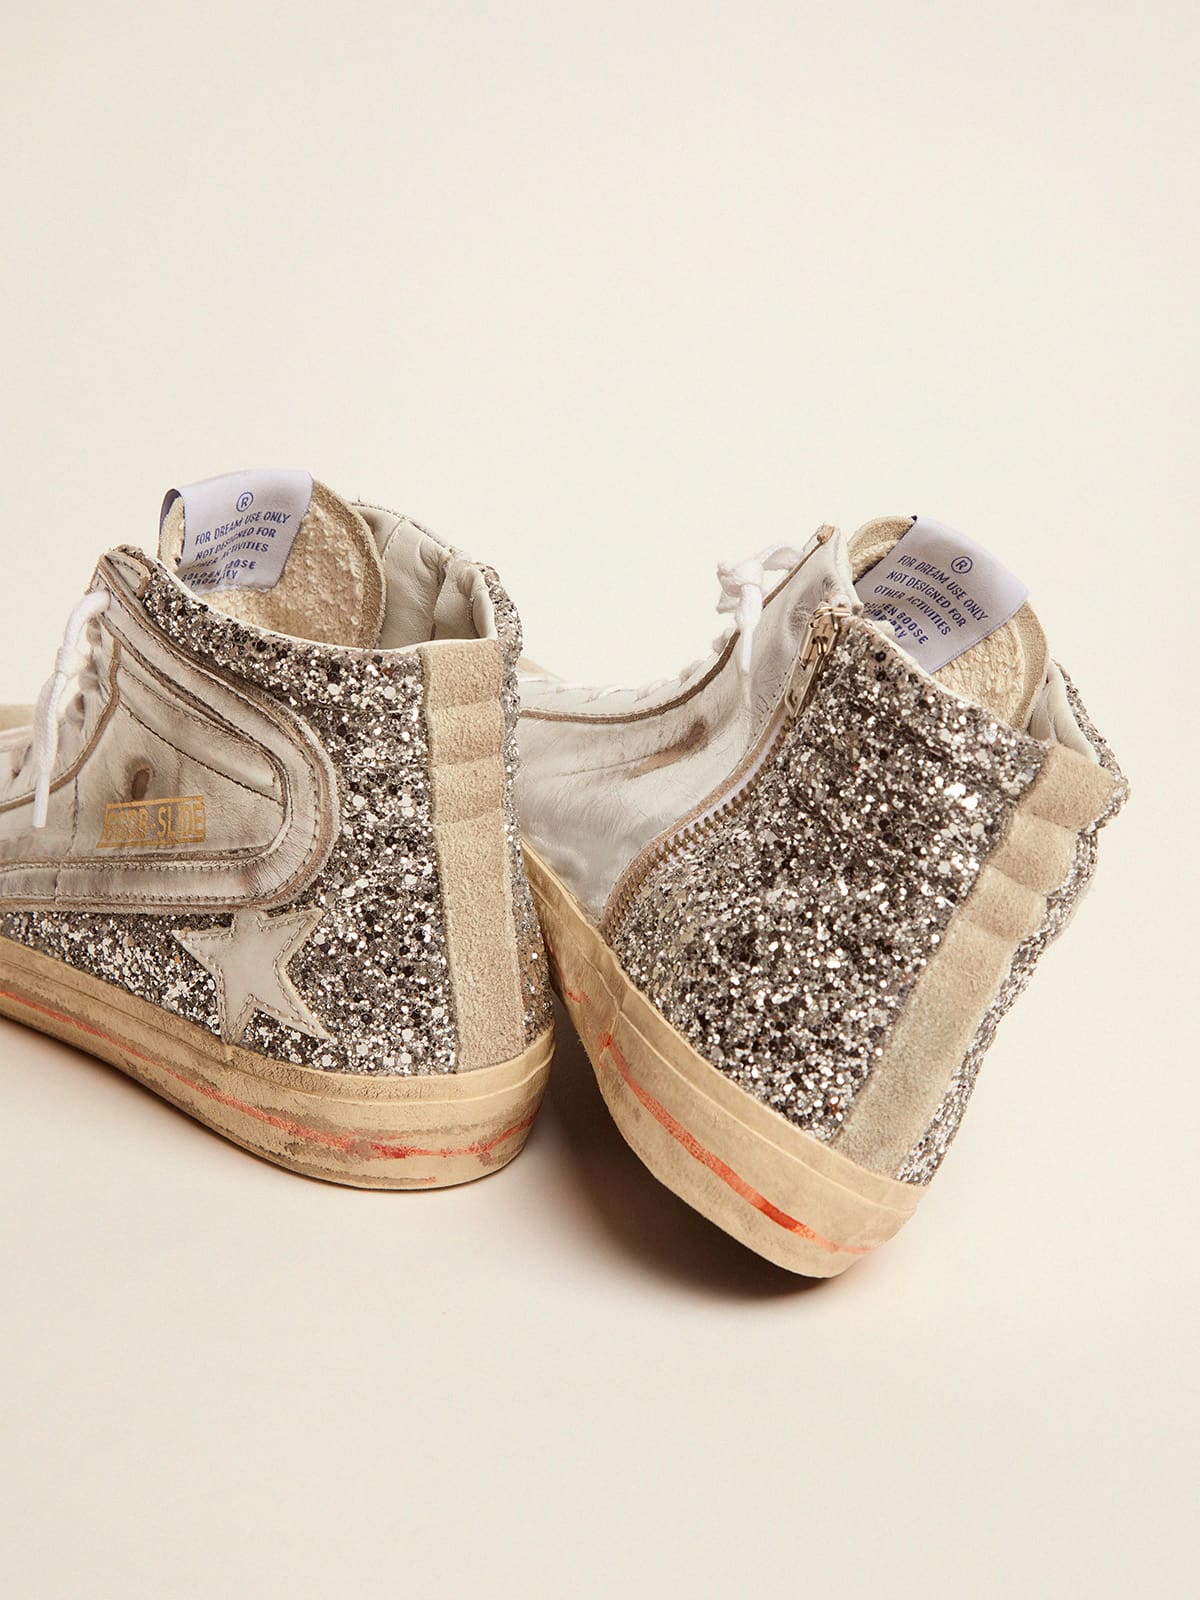 Women's Slide with laminated leather upper and silver glitter